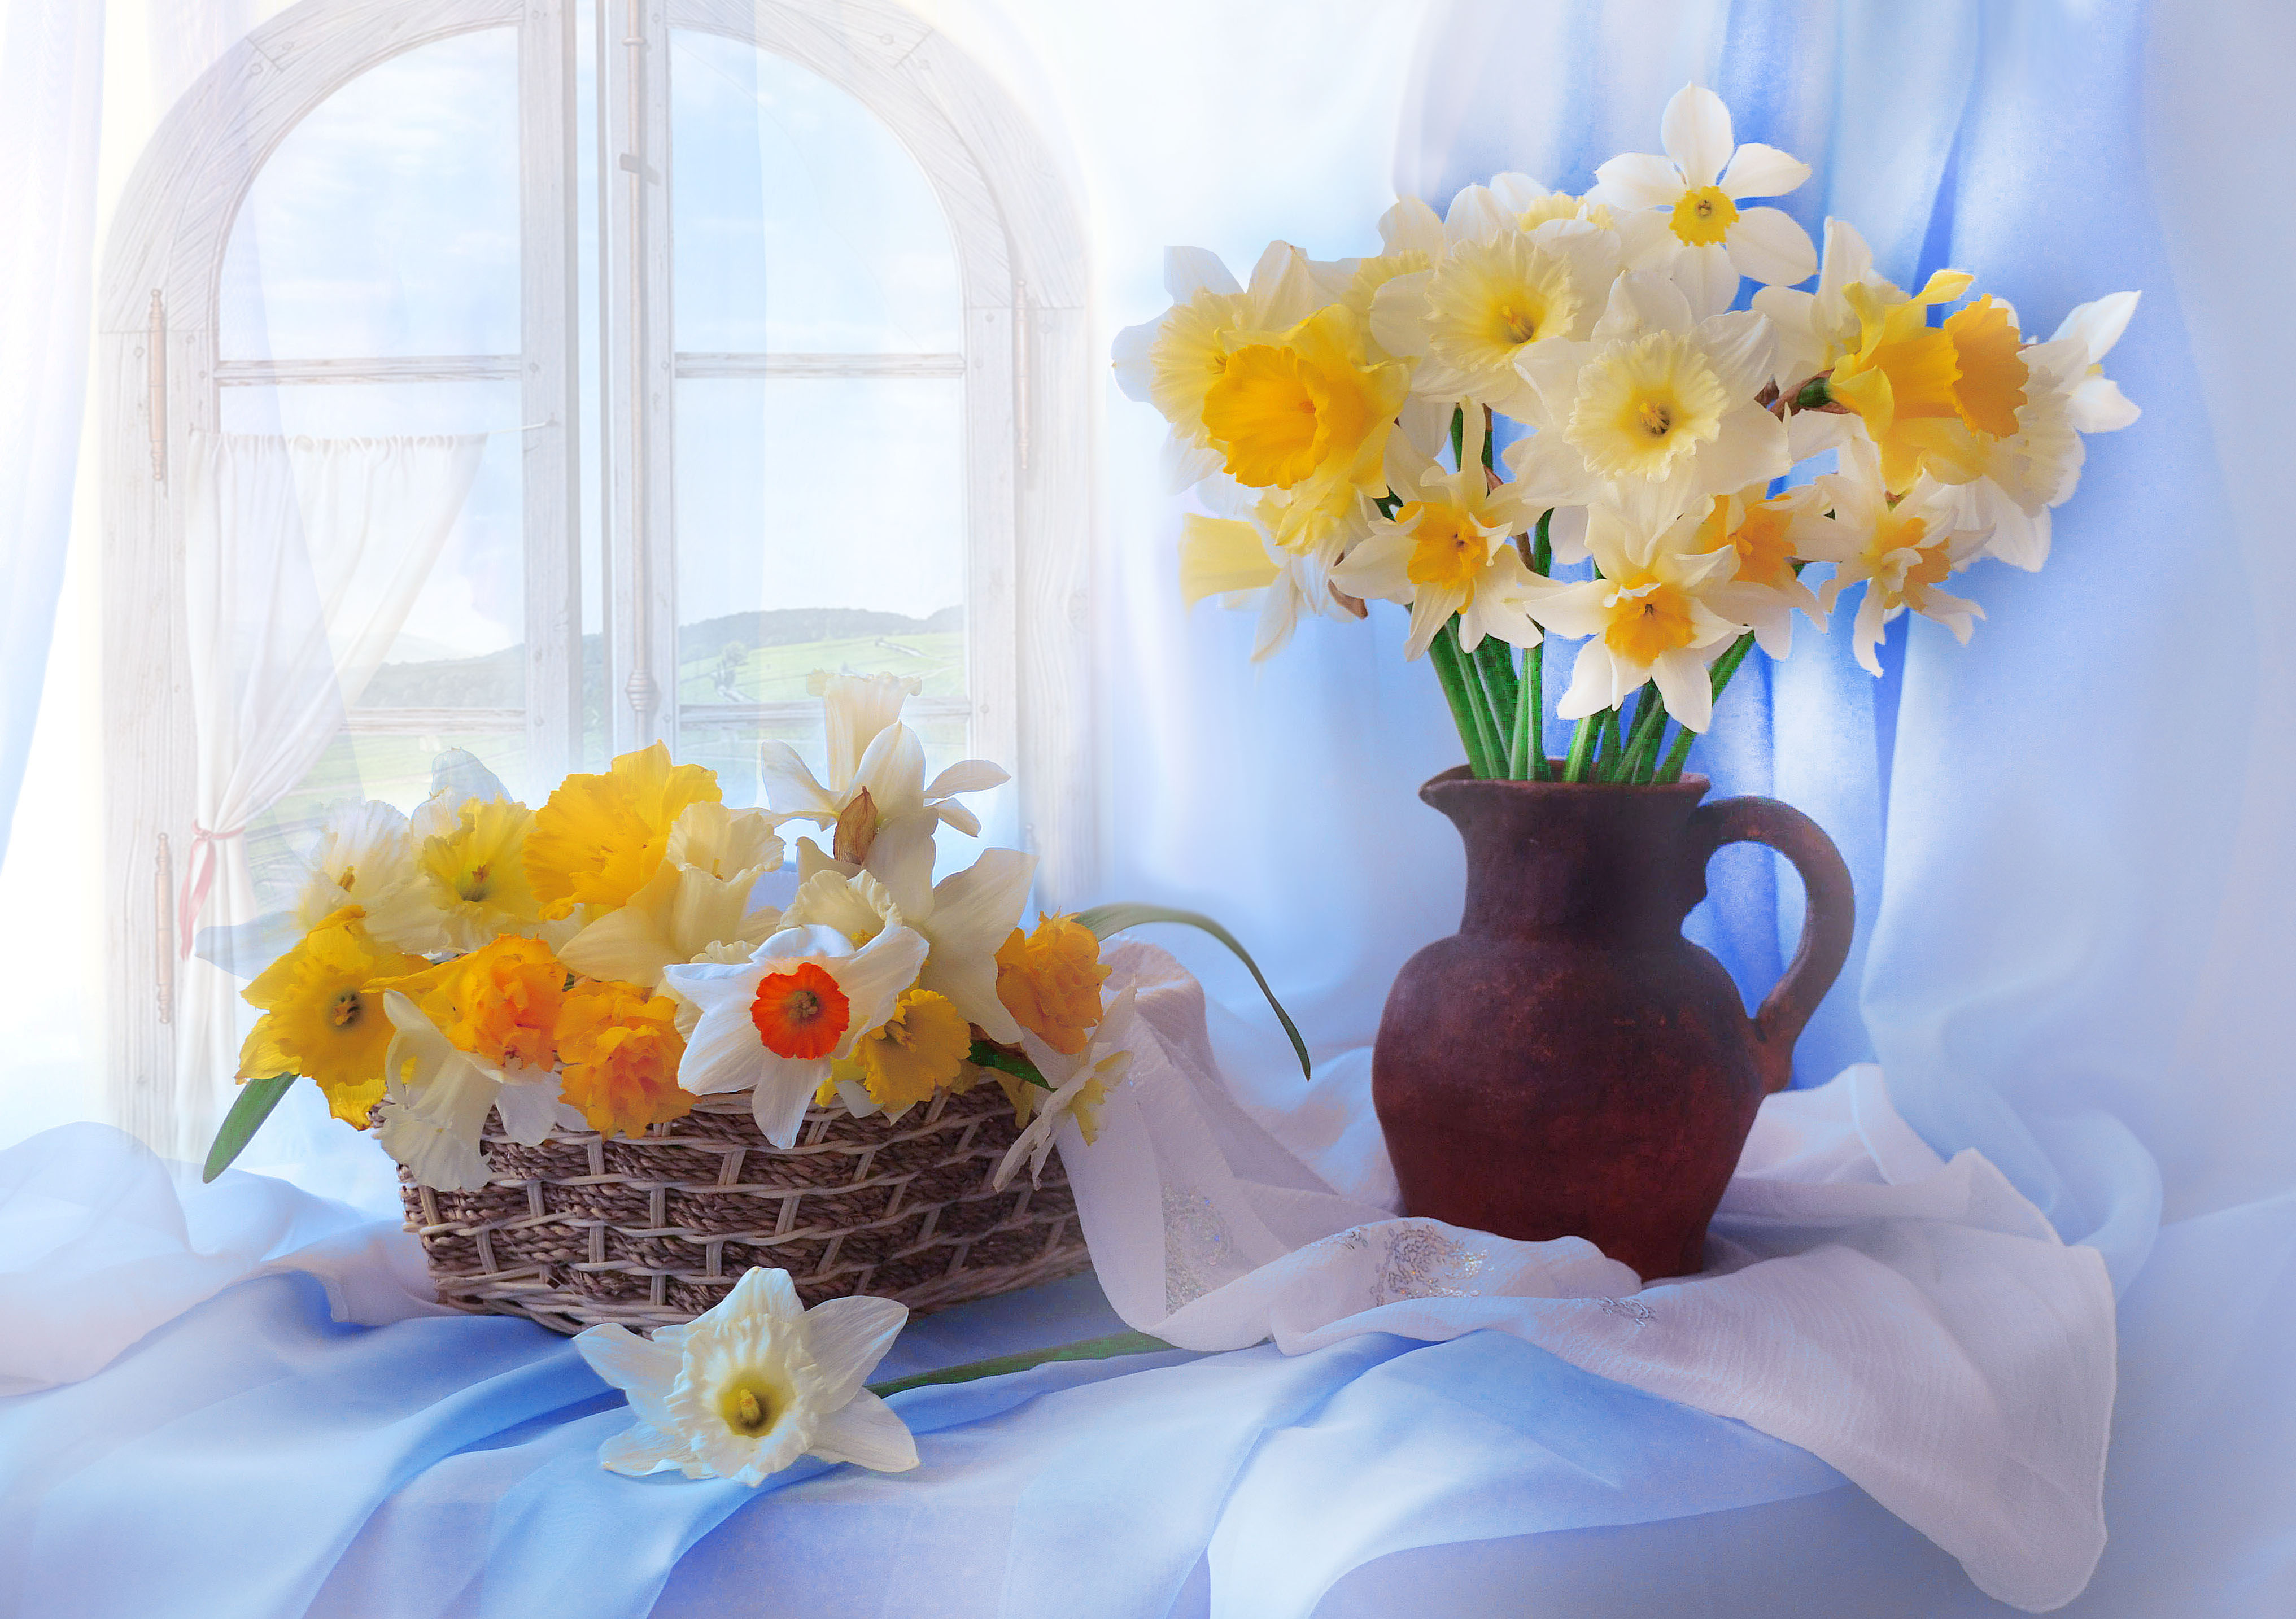 Wallpapers still life daffodils background on the desktop